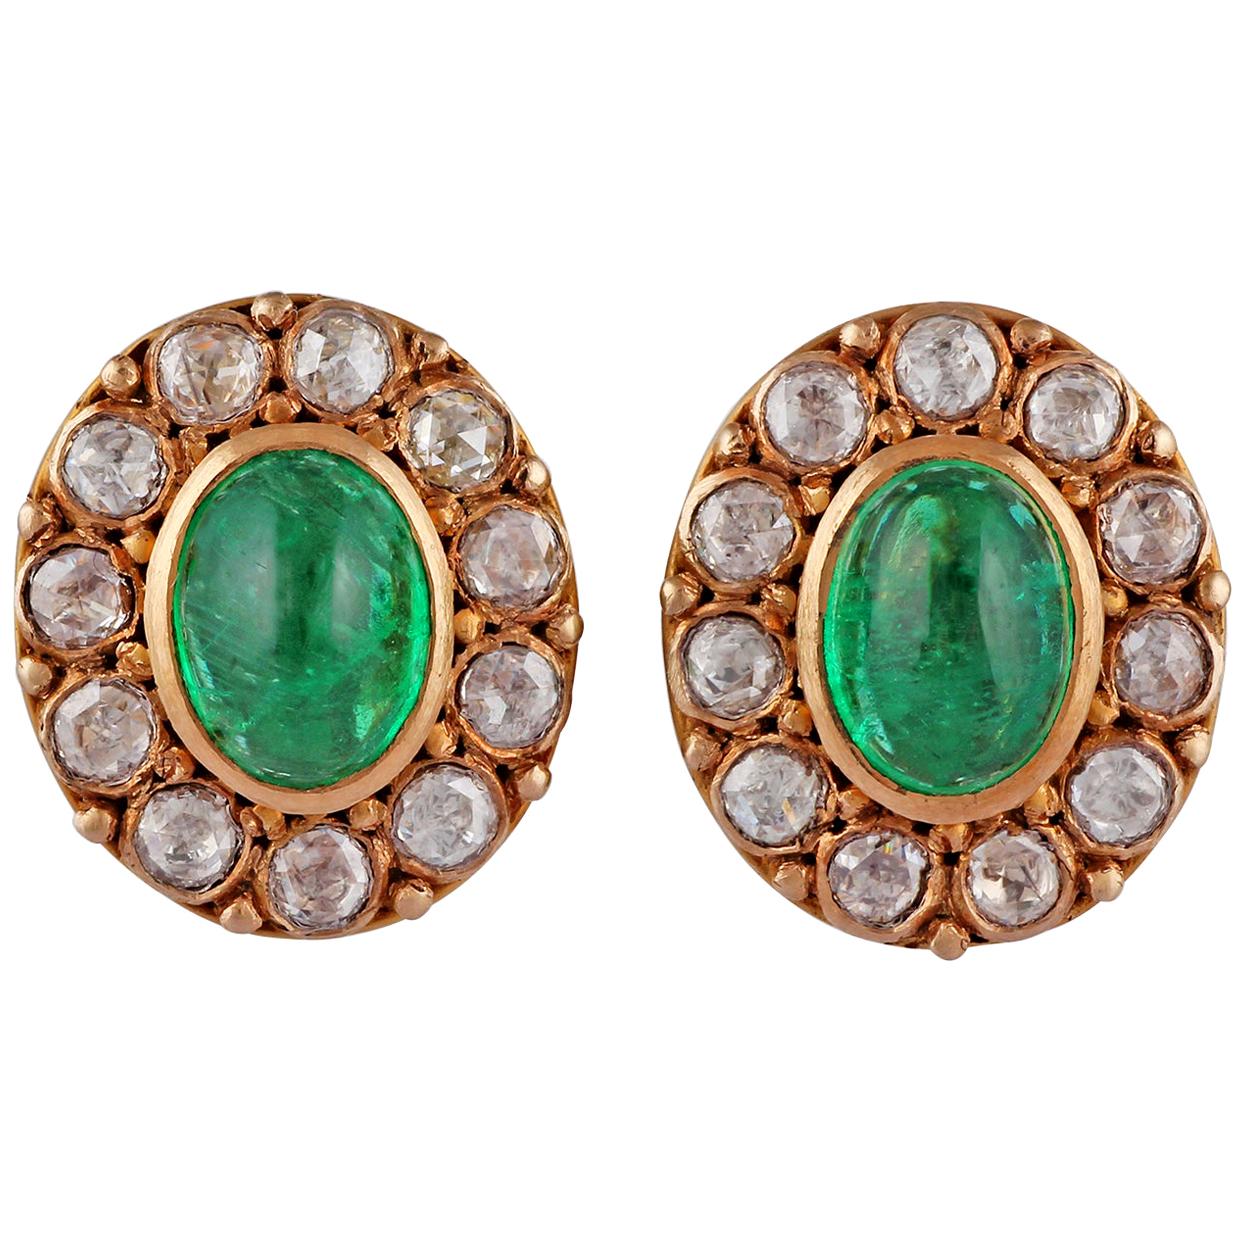 Cabochon Emerald and Diamond Earring Studded in 18 Karat Yellow Gold